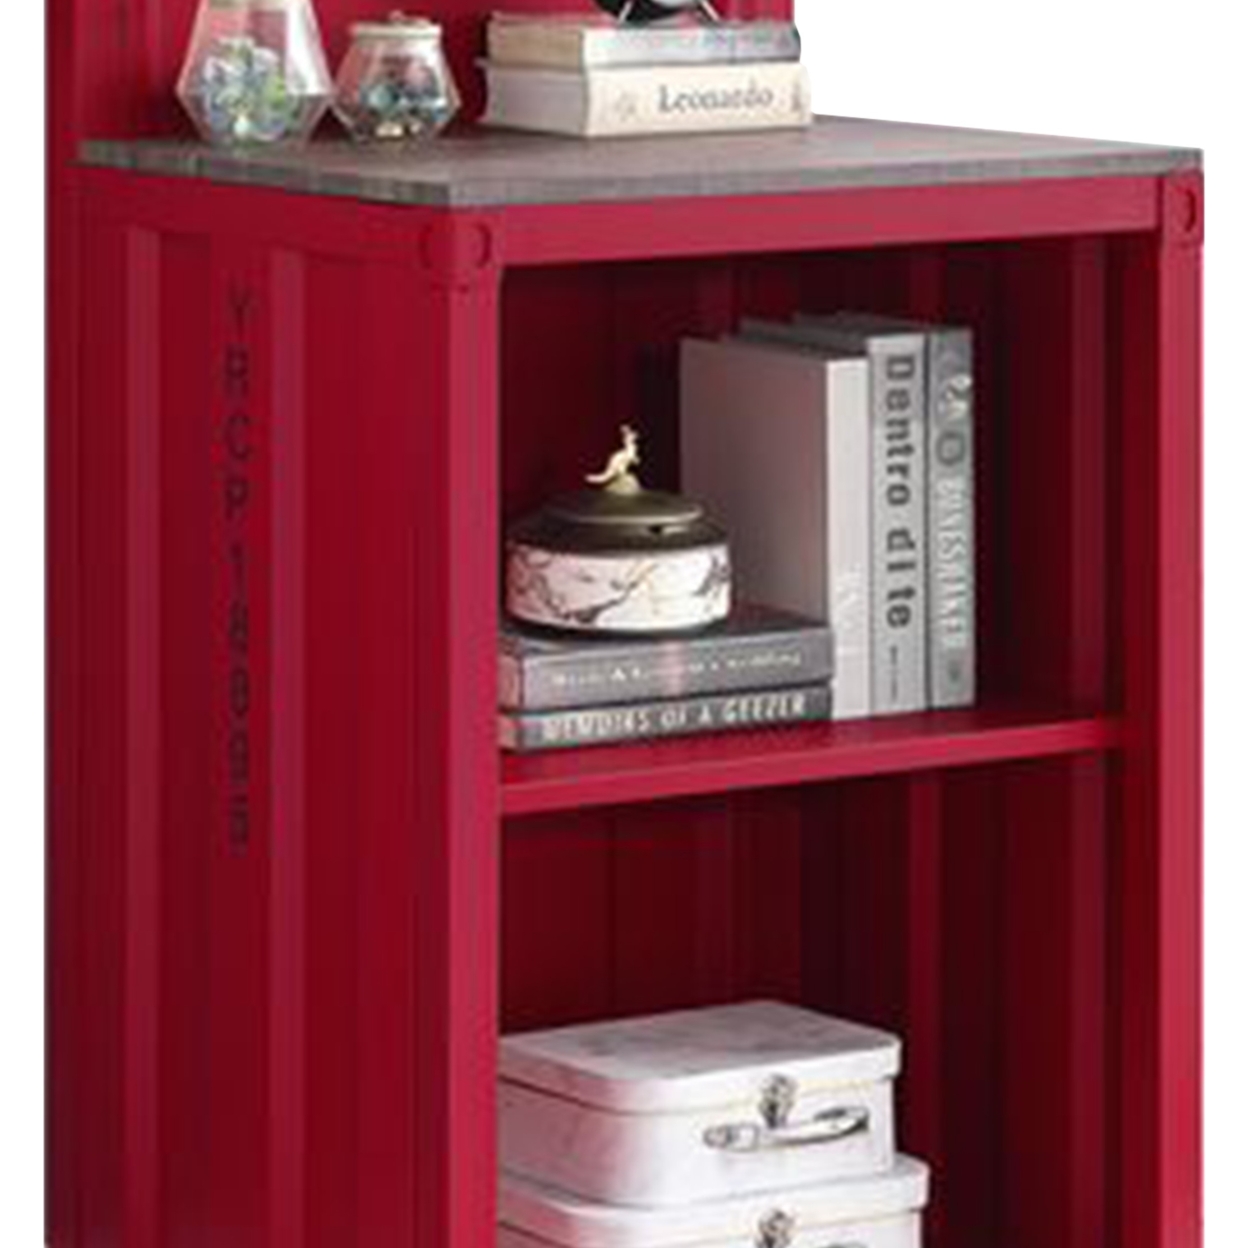 Reception Desk With Container Style And 3 Tier Shelves, Red- Saltoro Sherpi